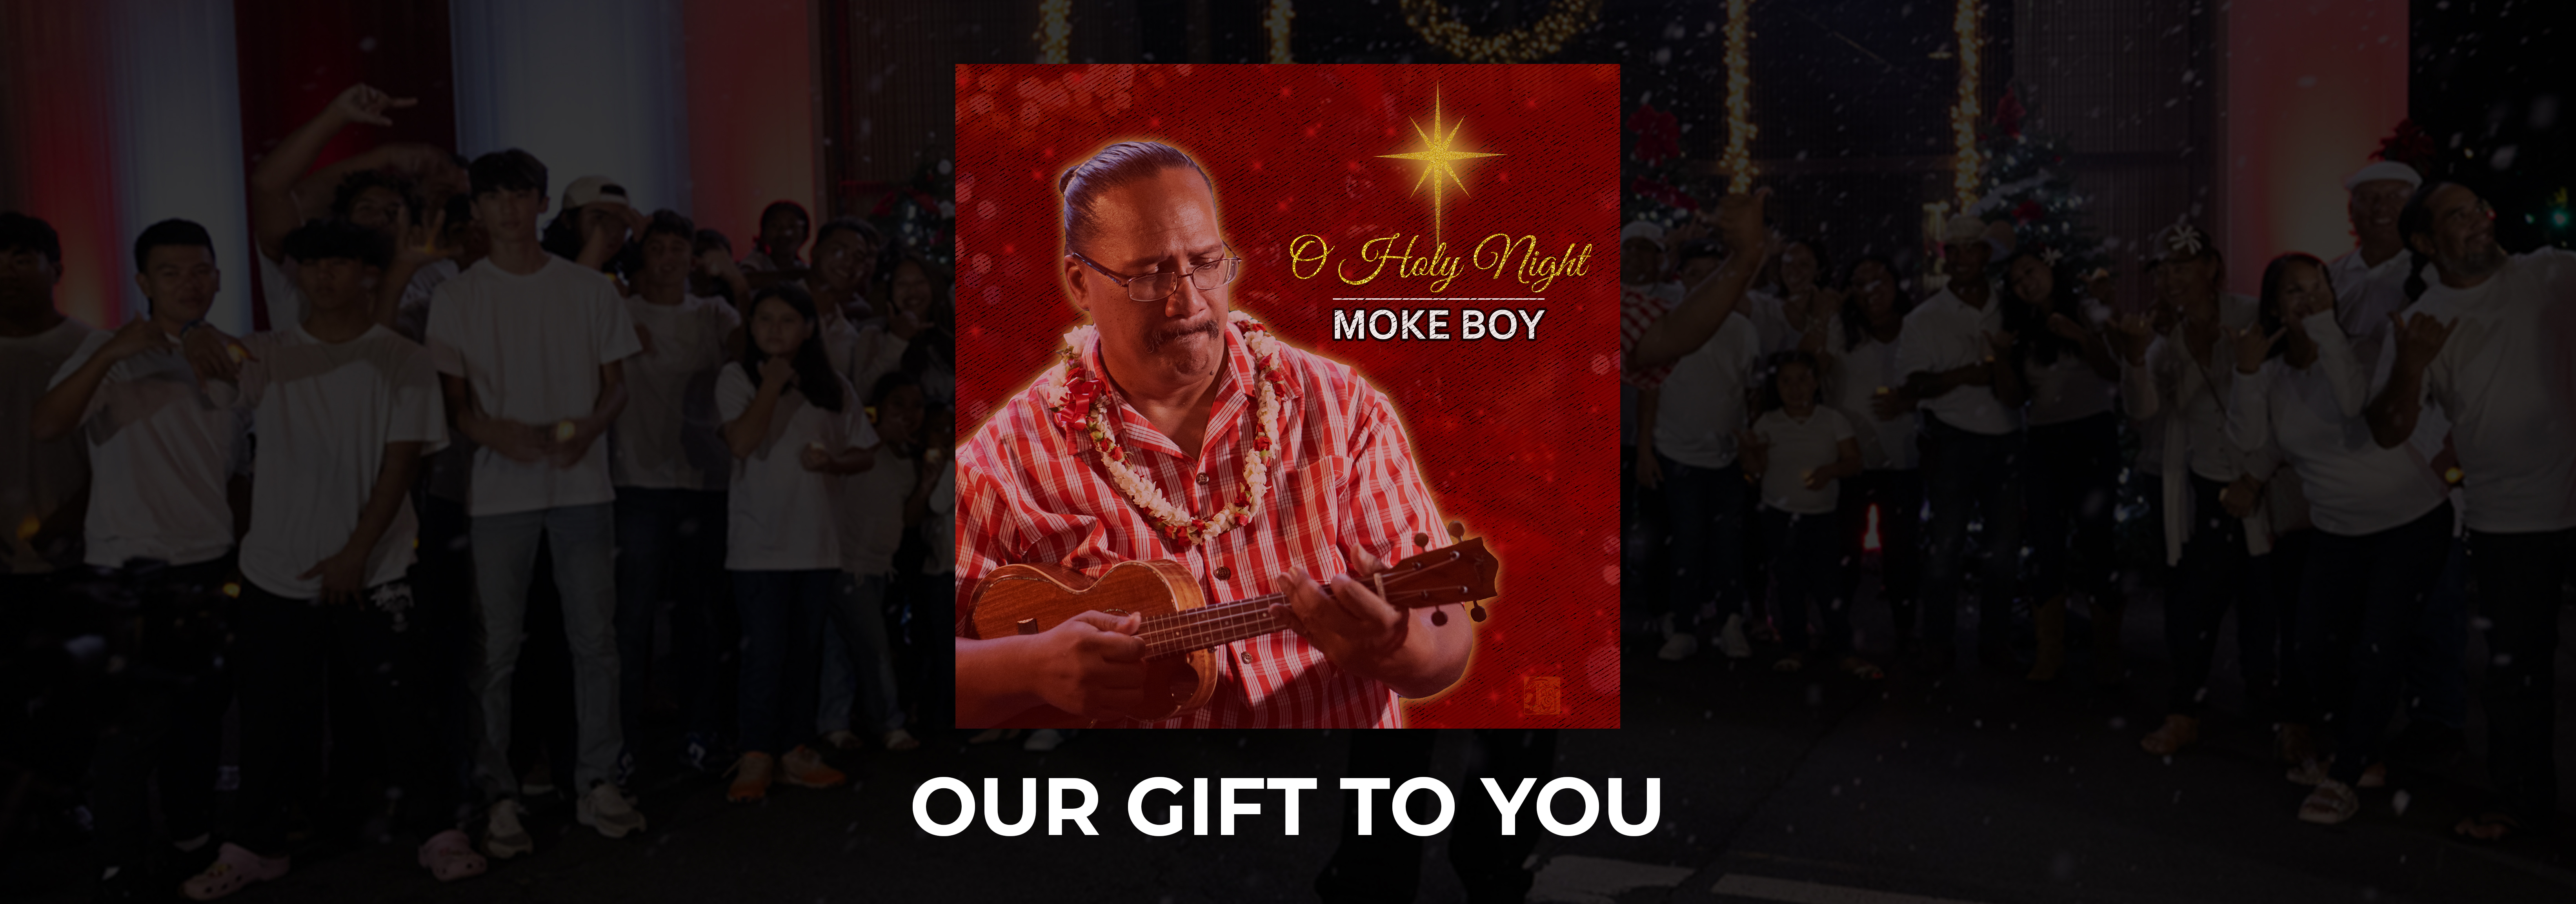 Our Gift to You